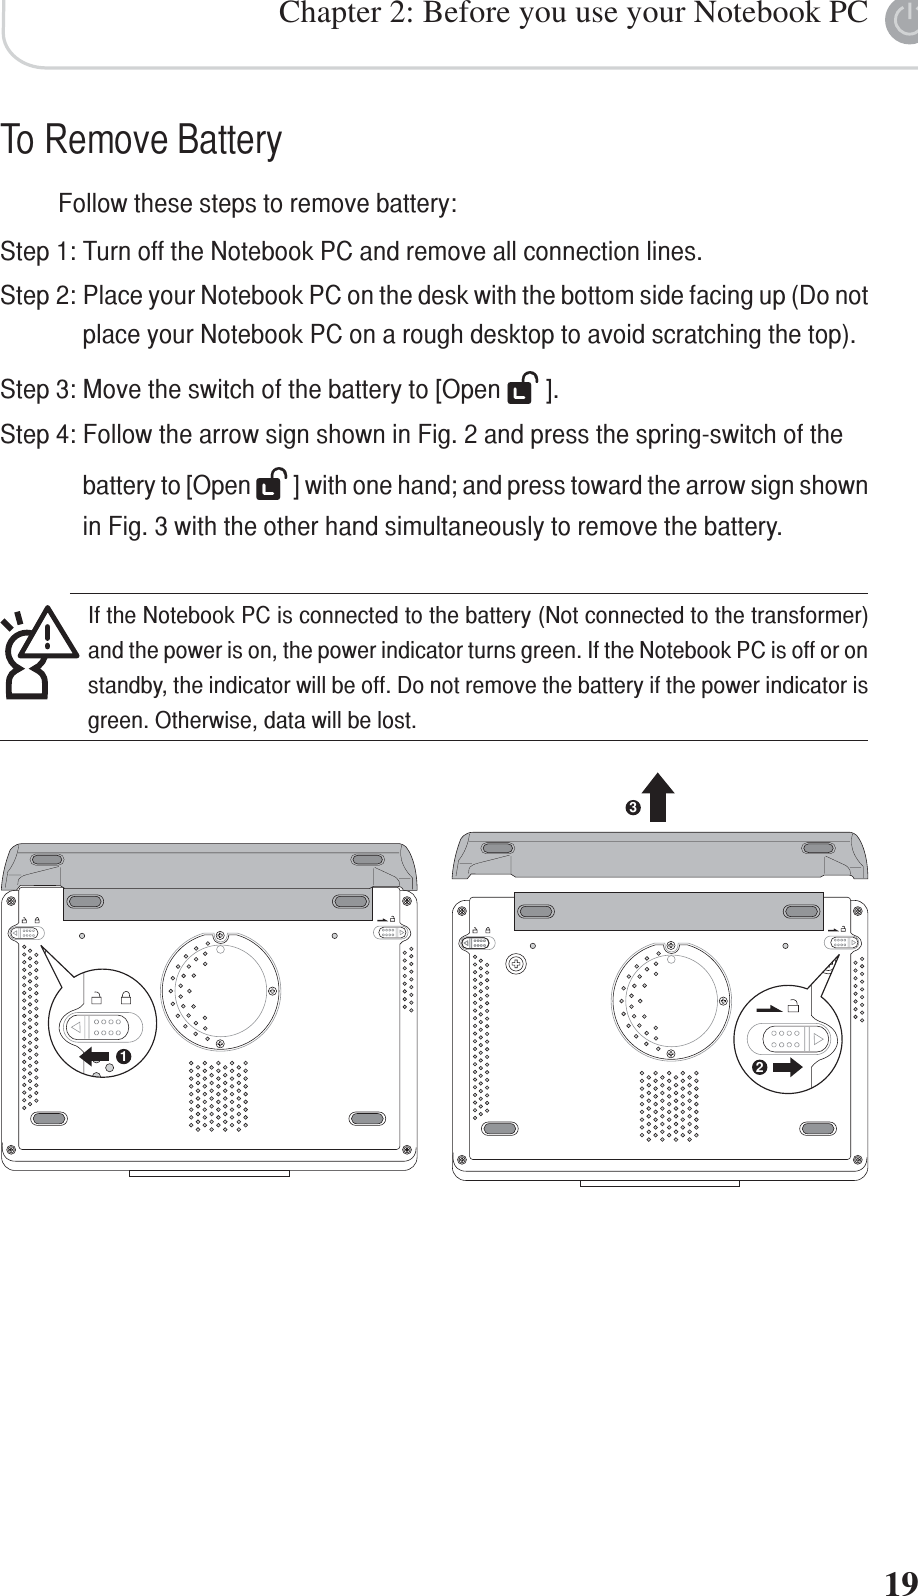 Chapter 2: Before you use your Notebook PC19132If the Notebook PC is connected to the battery (Not connected to the transformer)and the power is on, the power indicator turns green. If the Notebook PC is off or onstandby, the indicator will be off. Do not remove the battery if the power indicator isgreen. Otherwise, data will be lost.To Remove BatteryFollow these steps to remove battery:Step 1: Turn off the Notebook PC and remove all connection lines.Step 2: Place your Notebook PC on the desk with the bottom side facing up (Do notplace your Notebook PC on a rough desktop to avoid scratching the top).Step 3: Move the switch of the battery to [Open   ].Step 4: Follow the arrow sign shown in Fig. 2 and press the spring-switch of thebattery to [Open   ] with one hand; and press toward the arrow sign shownin Fig. 3 with the other hand simultaneously to remove the battery.